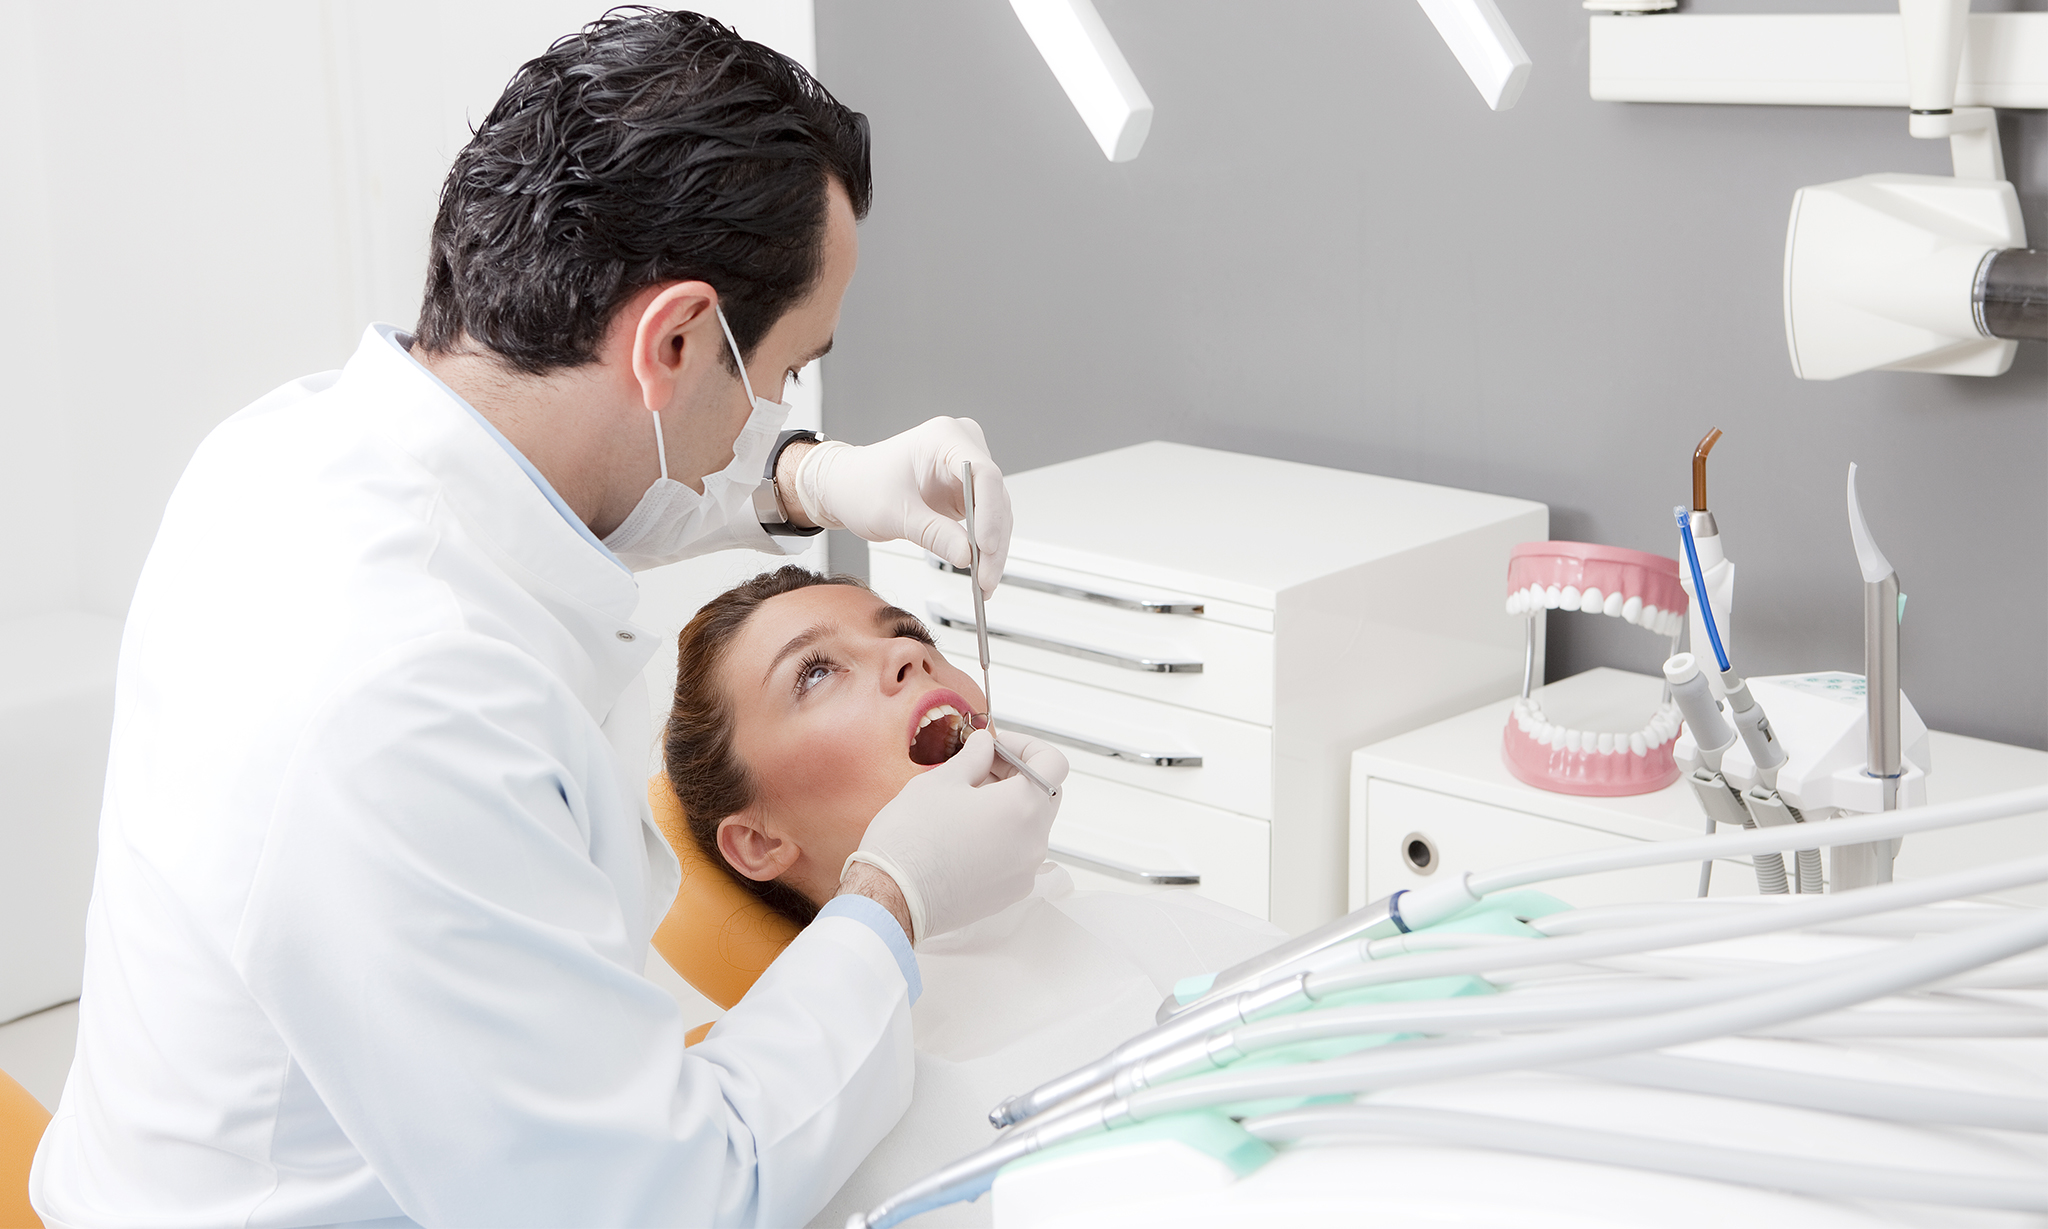 Know More about a Dental Clinic - متخصص ارتودنسى در فرديس كرج